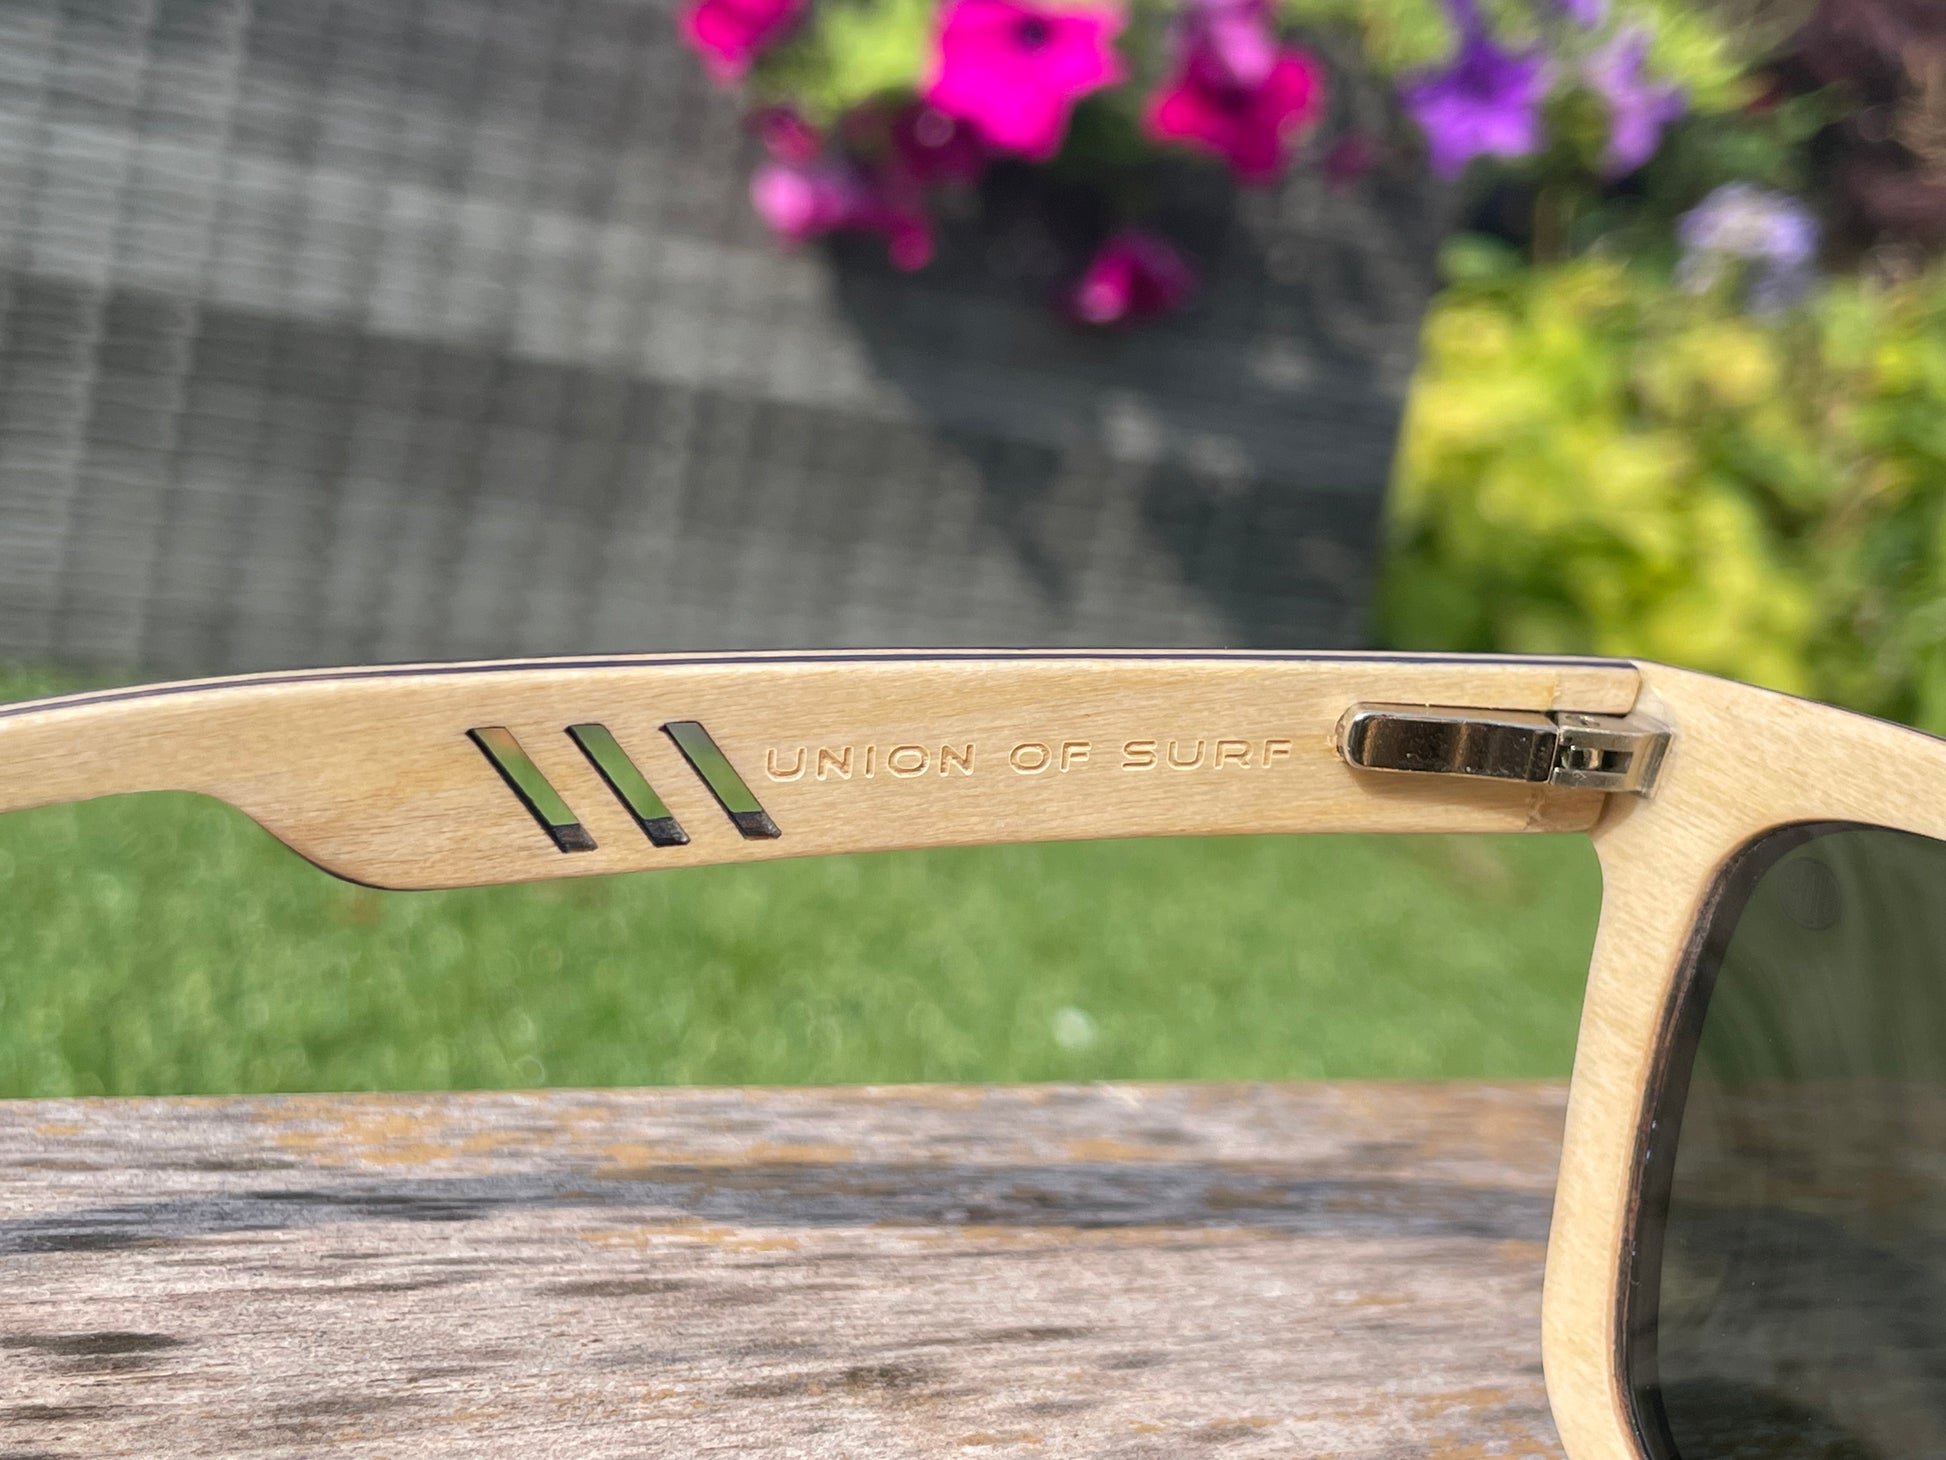 Eco Friendly SunglassesPit DogPit Dogs feature a classic design, re-engineered in wood with an Ebony veneer.    Available in a soft green lens or a black lens that sharpens colour and reduces gla